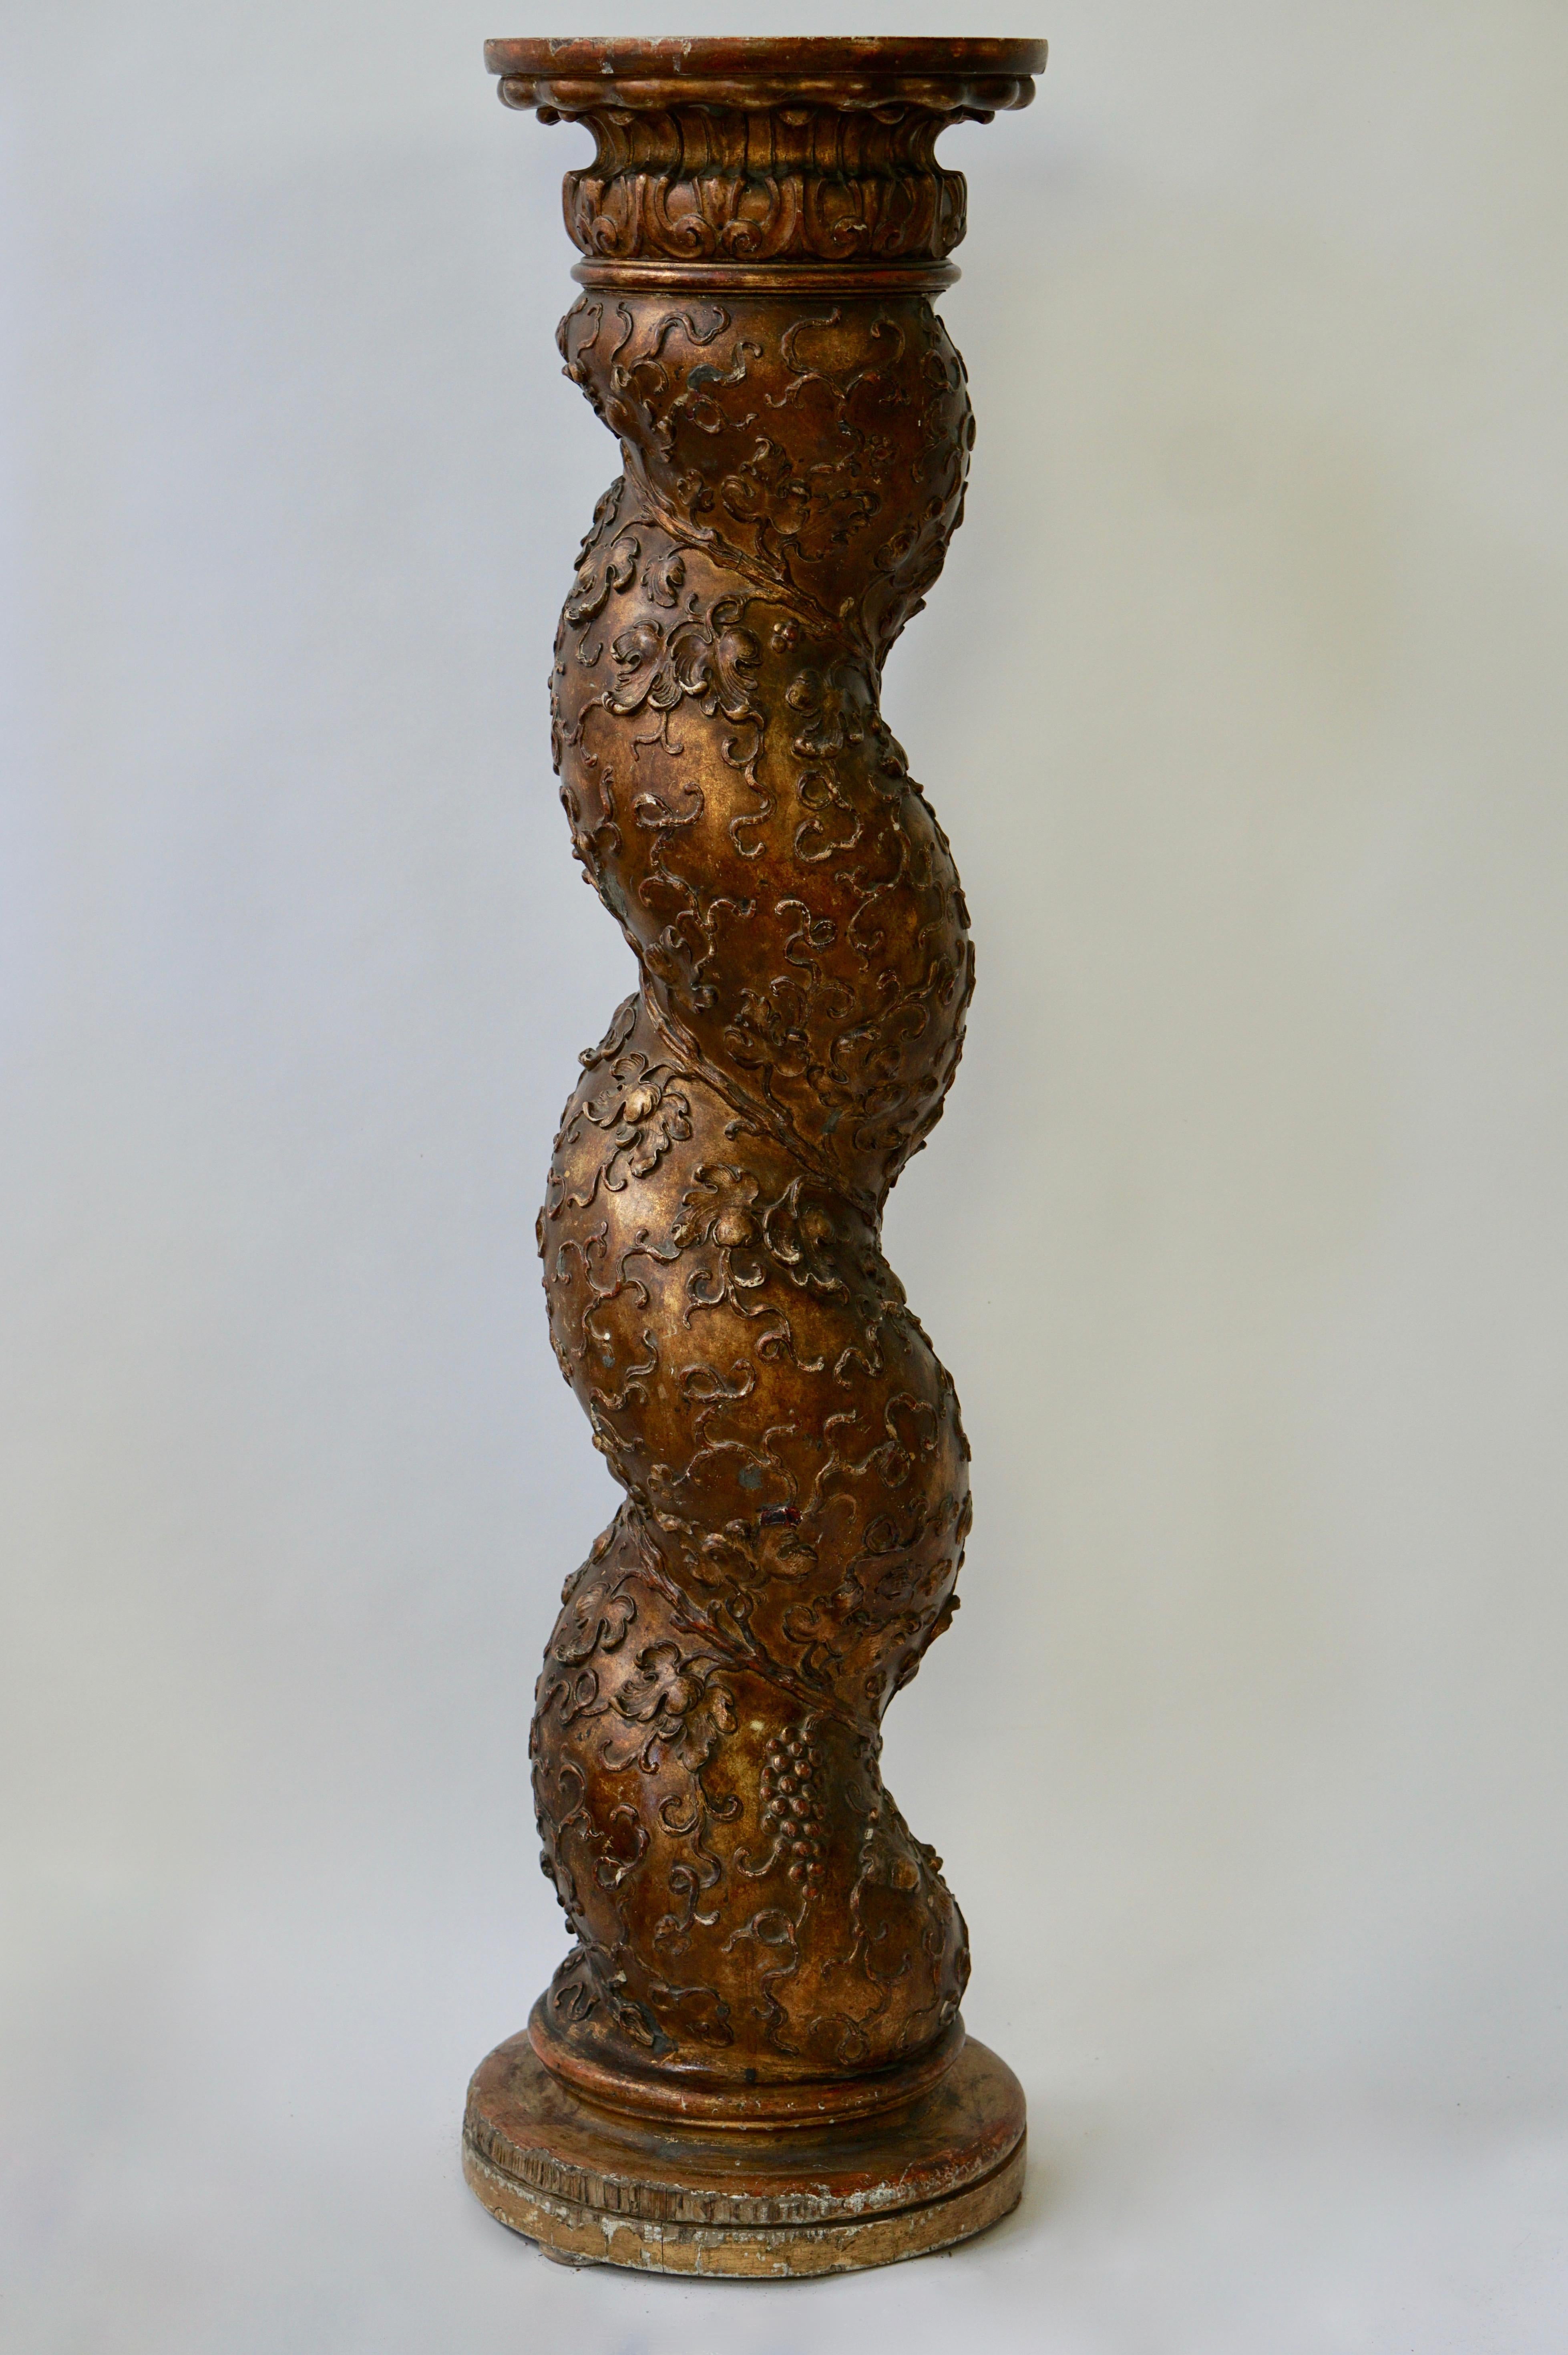 A fine spirally turned gilt wood column (pedestal), decorated overall with stucco scrolling vine and grapes under a capital with scrolled decoration, late 19th-early 20th century.
Probably produced by the famous Antwerp workshop of Franck.
Measures: